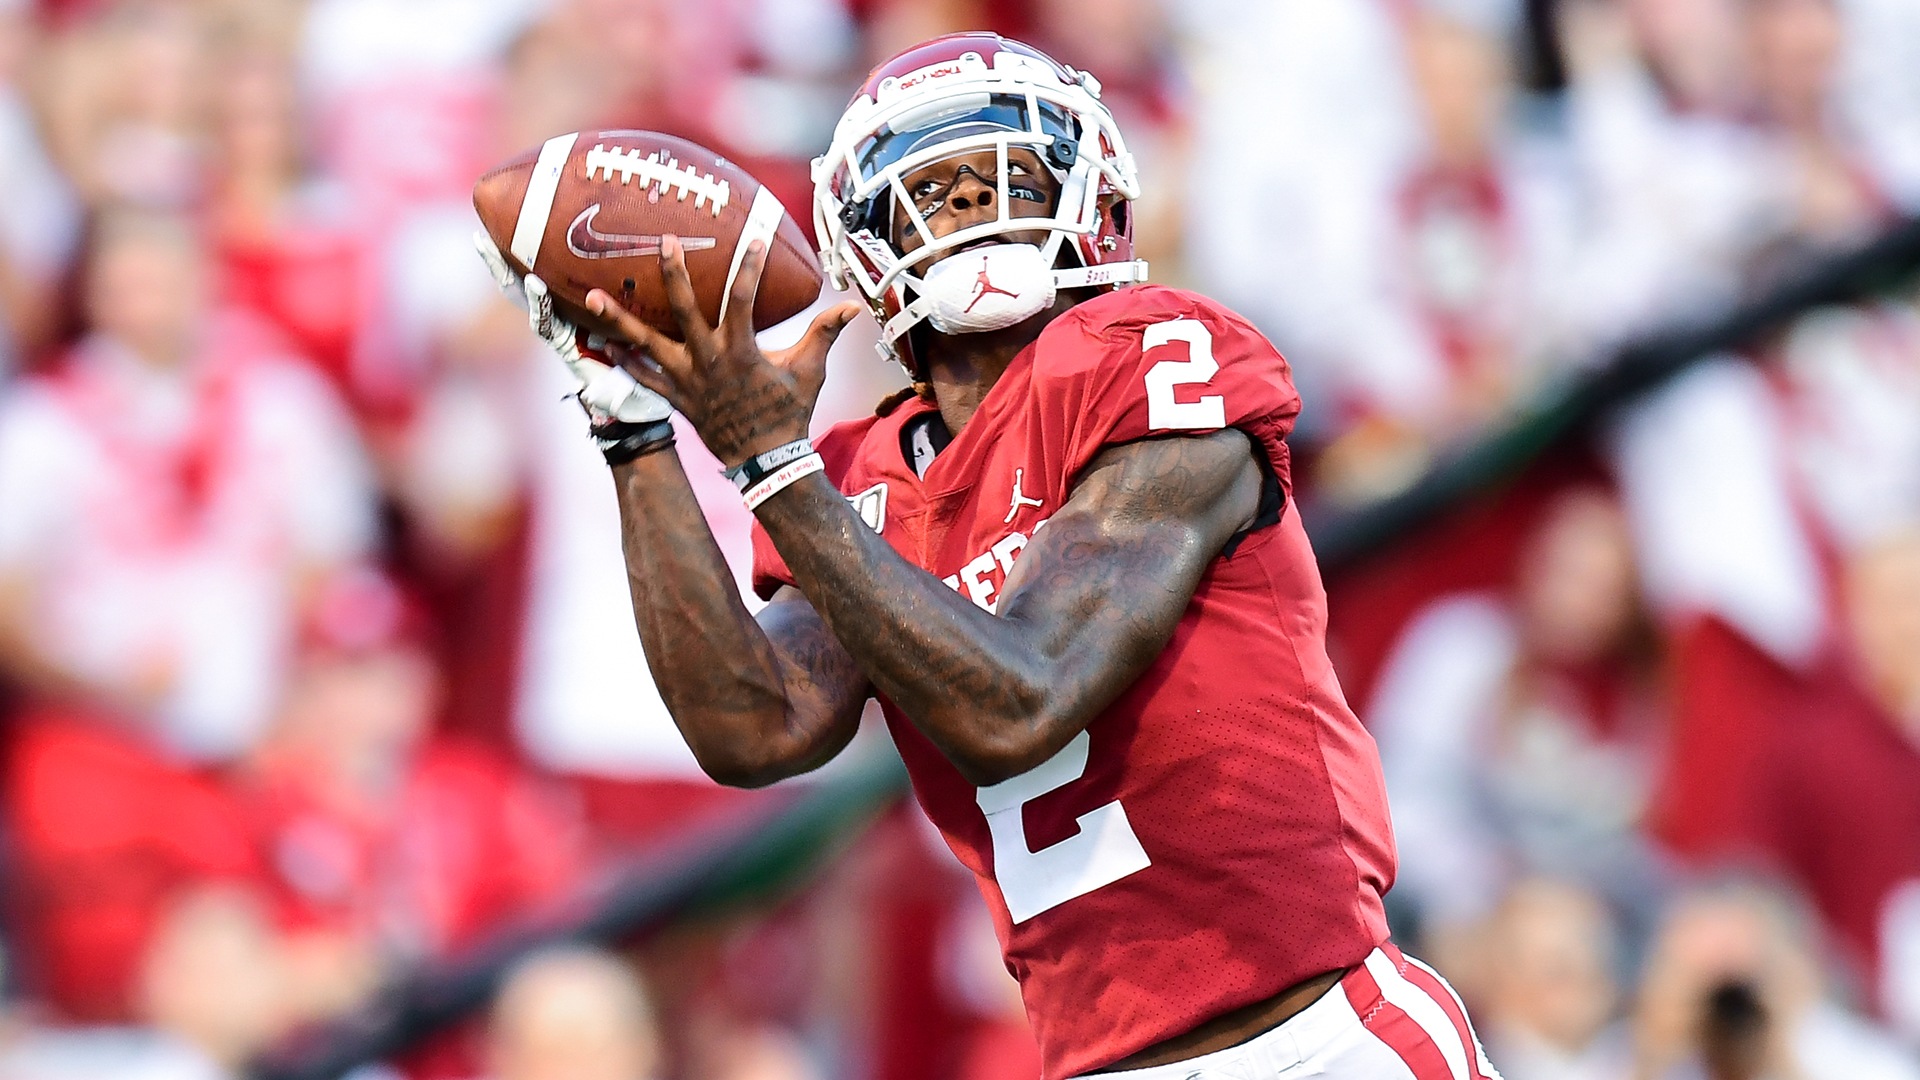 CeeDee Lamb caught all three of Jalen Hurts' touchdown passes on Satruday, making him a must-have to win the big money in DFS. (Image: Sooner Sports)